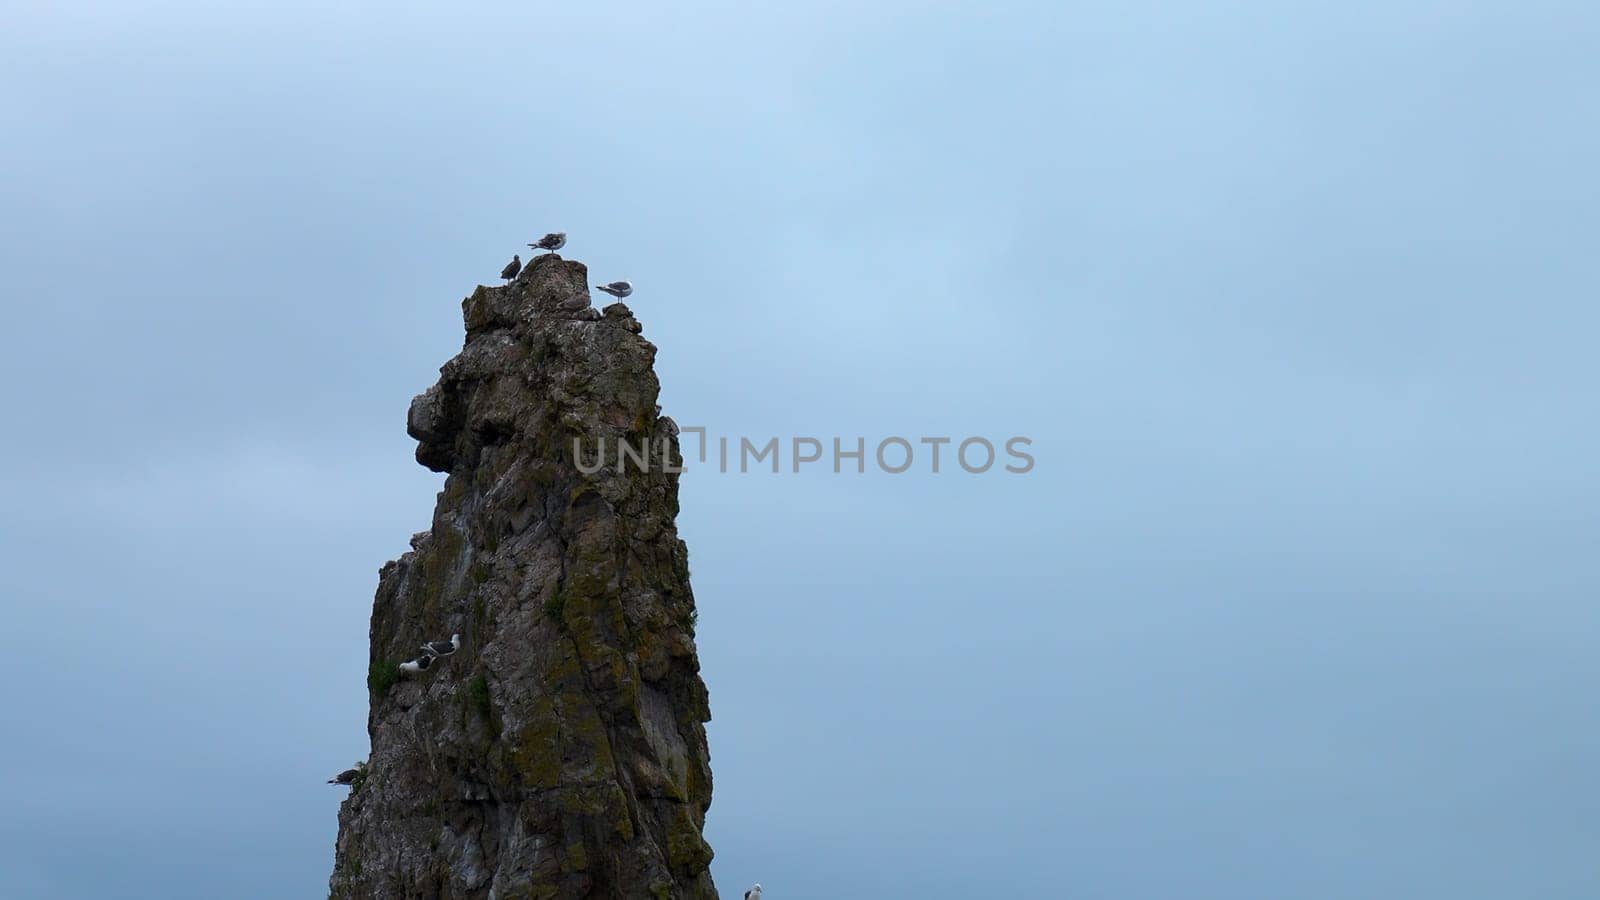 Top of long cliff with seagulls. Clip. Seagulls sit on top of cliff on background cloudy sky. Seagulls fly and sit on small rock in sea in cloudy weather.